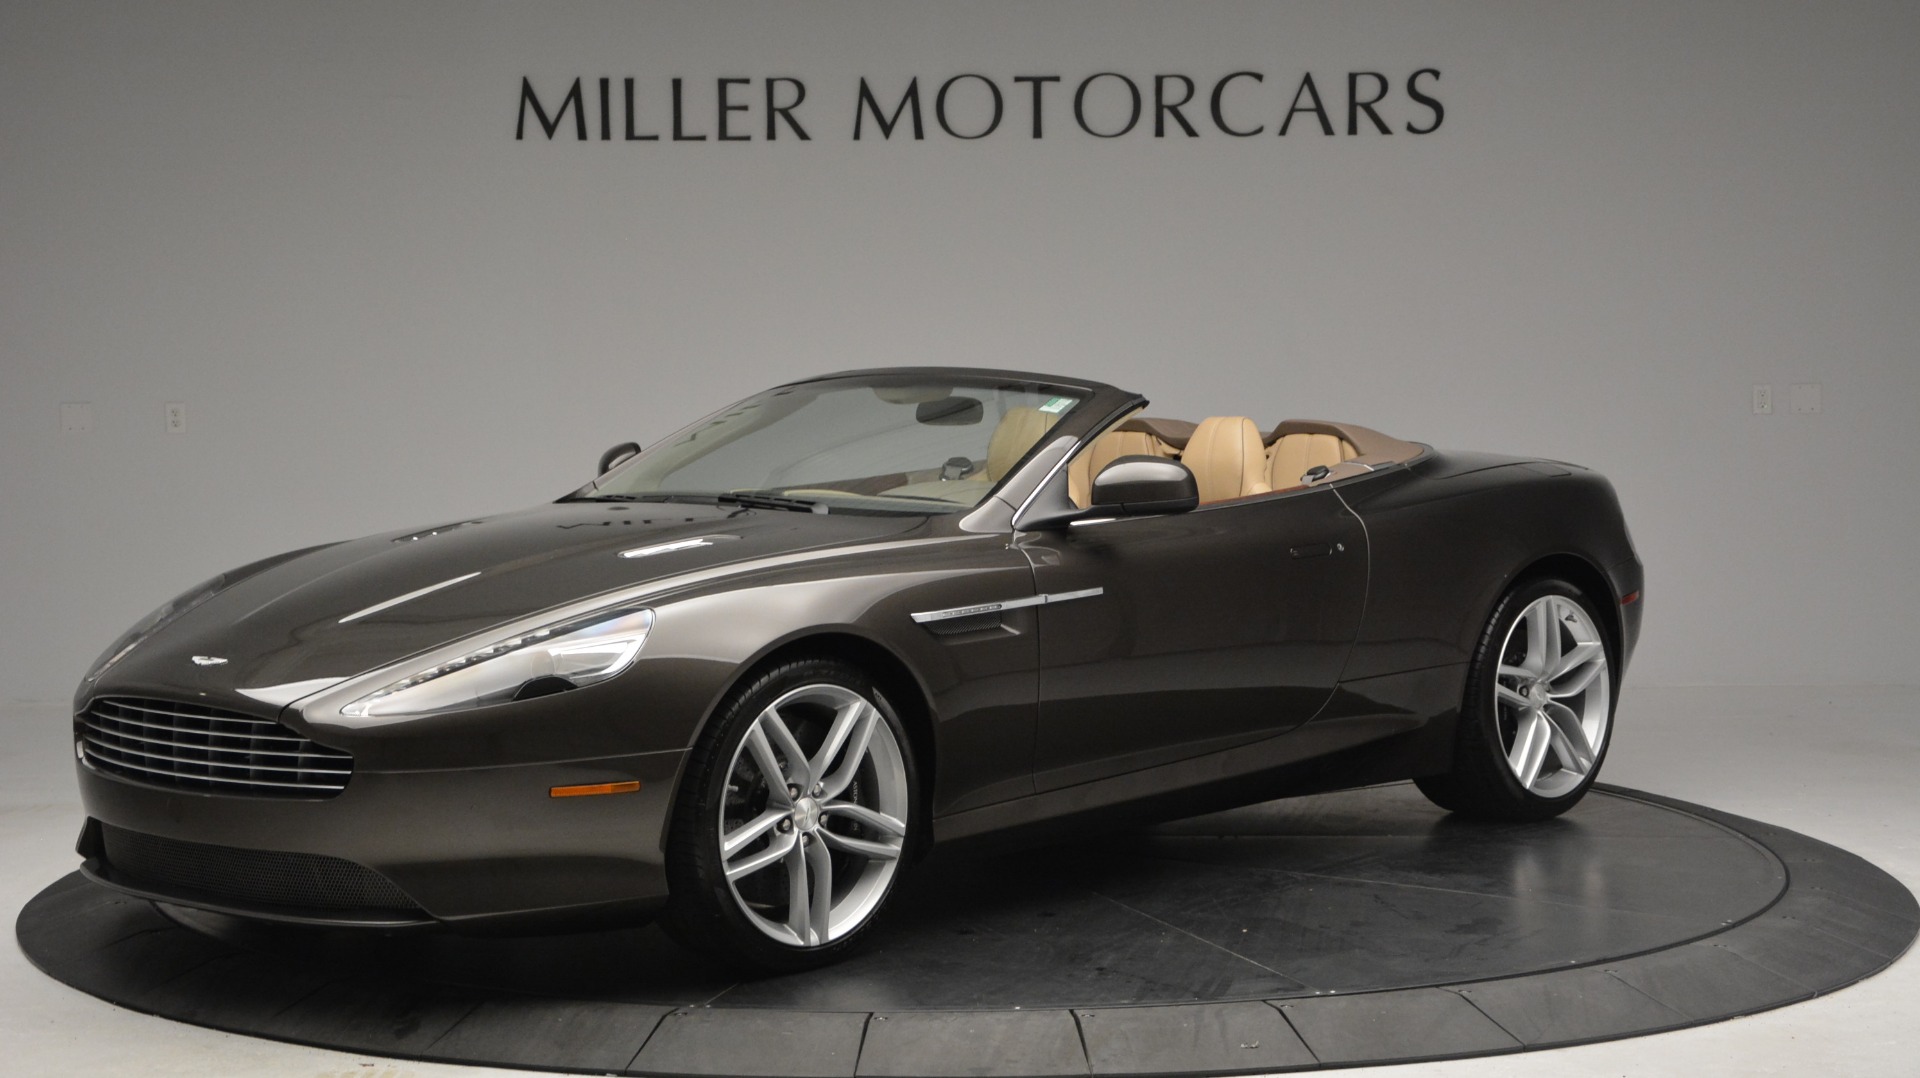 Used 2012 Aston Martin Virage Convertible for sale Sold at Aston Martin of Greenwich in Greenwich CT 06830 1